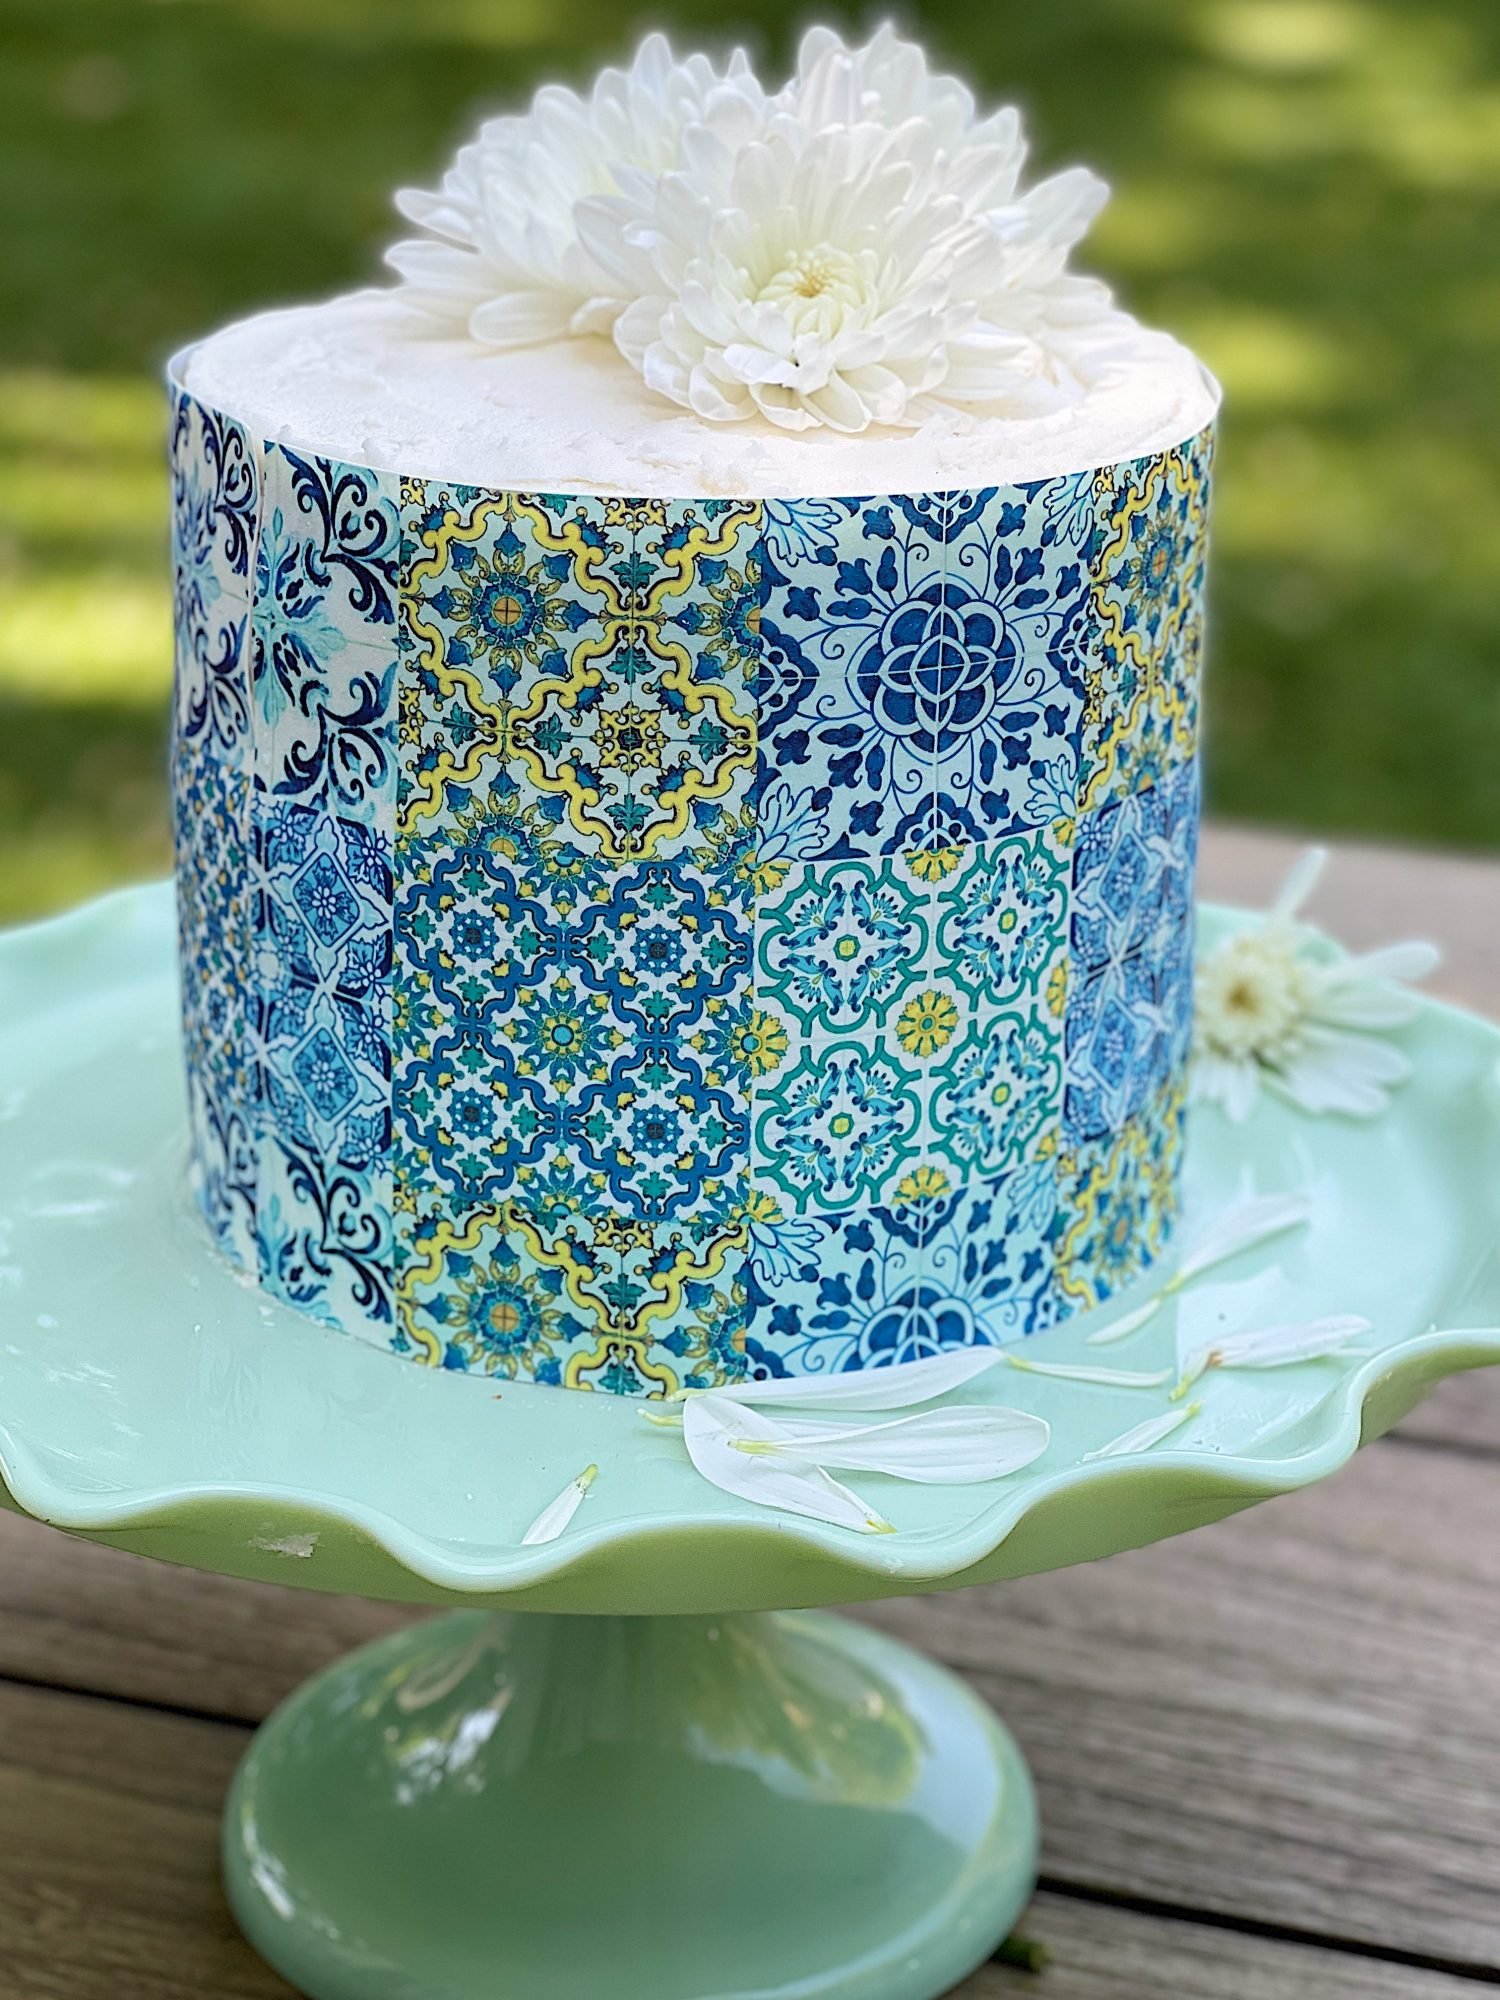 https://my100yearoldhome.com/wp-content/uploads/2022/05/How-to-Frost-a-Cake-with-Edible-Paper-Pastry-Sheets-4.jpg